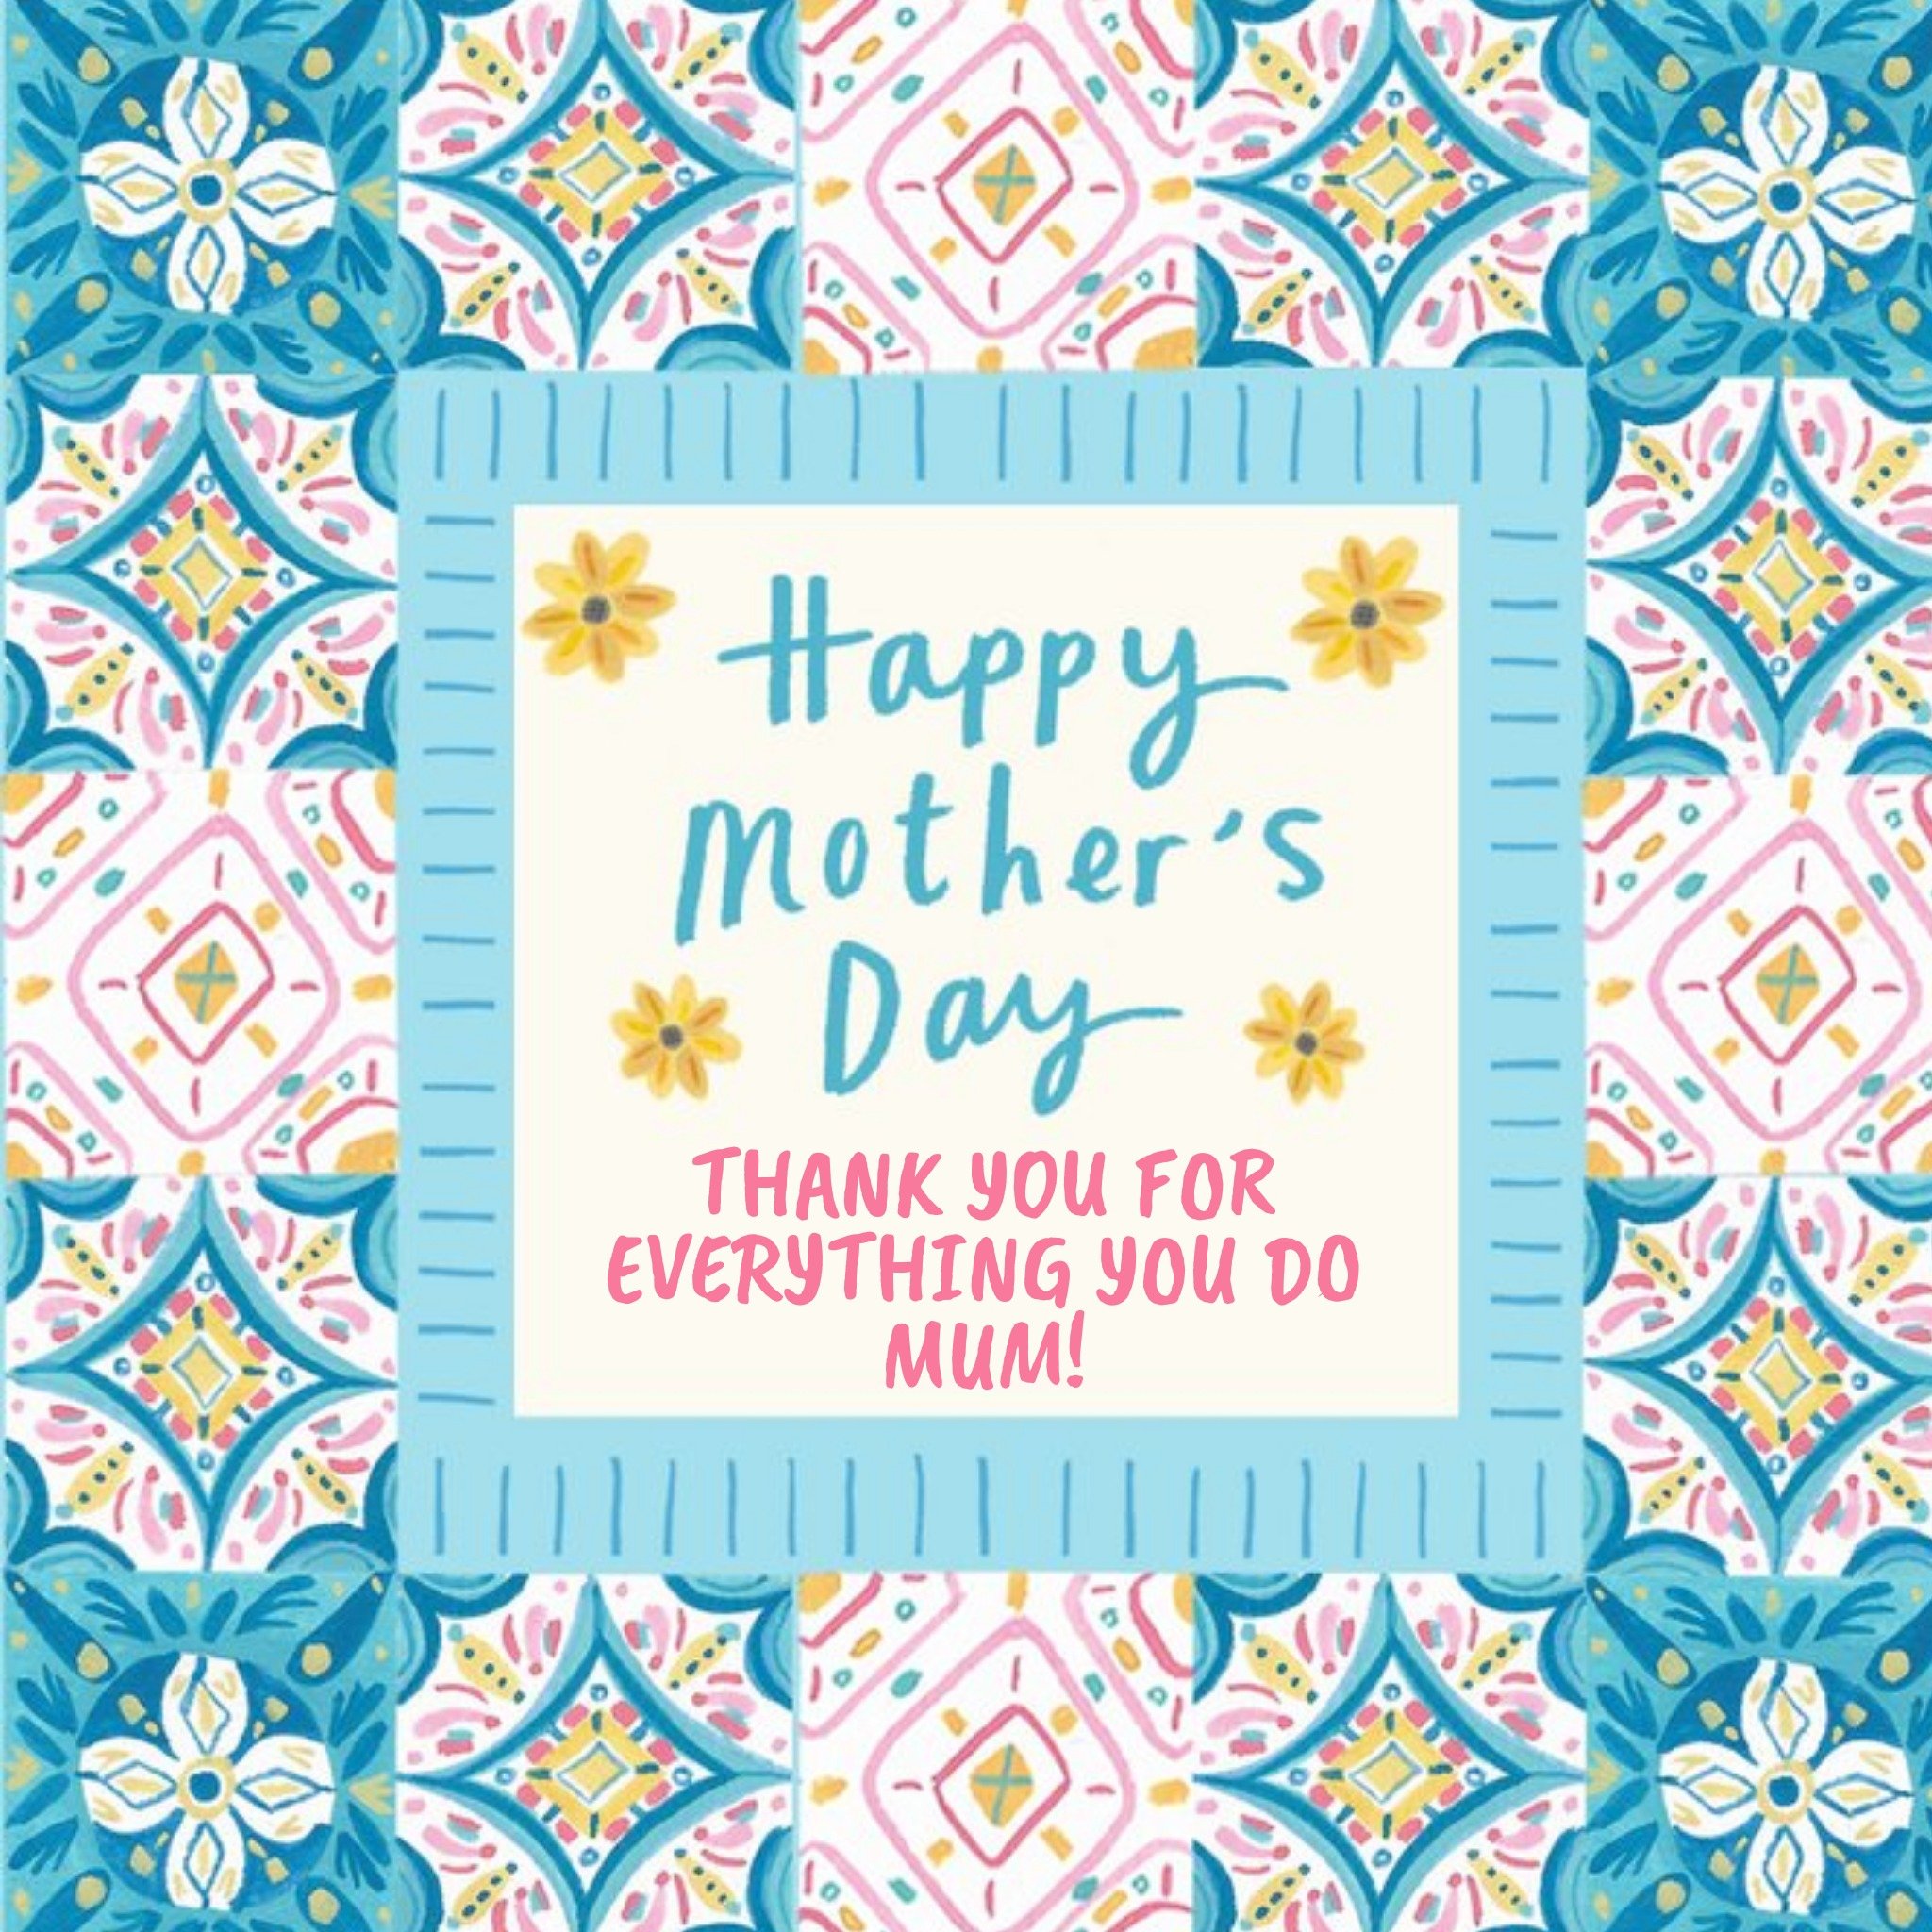 Moonpig Moroccan-Inspired Tiles Personalised Happy Mother's Day Card, Large